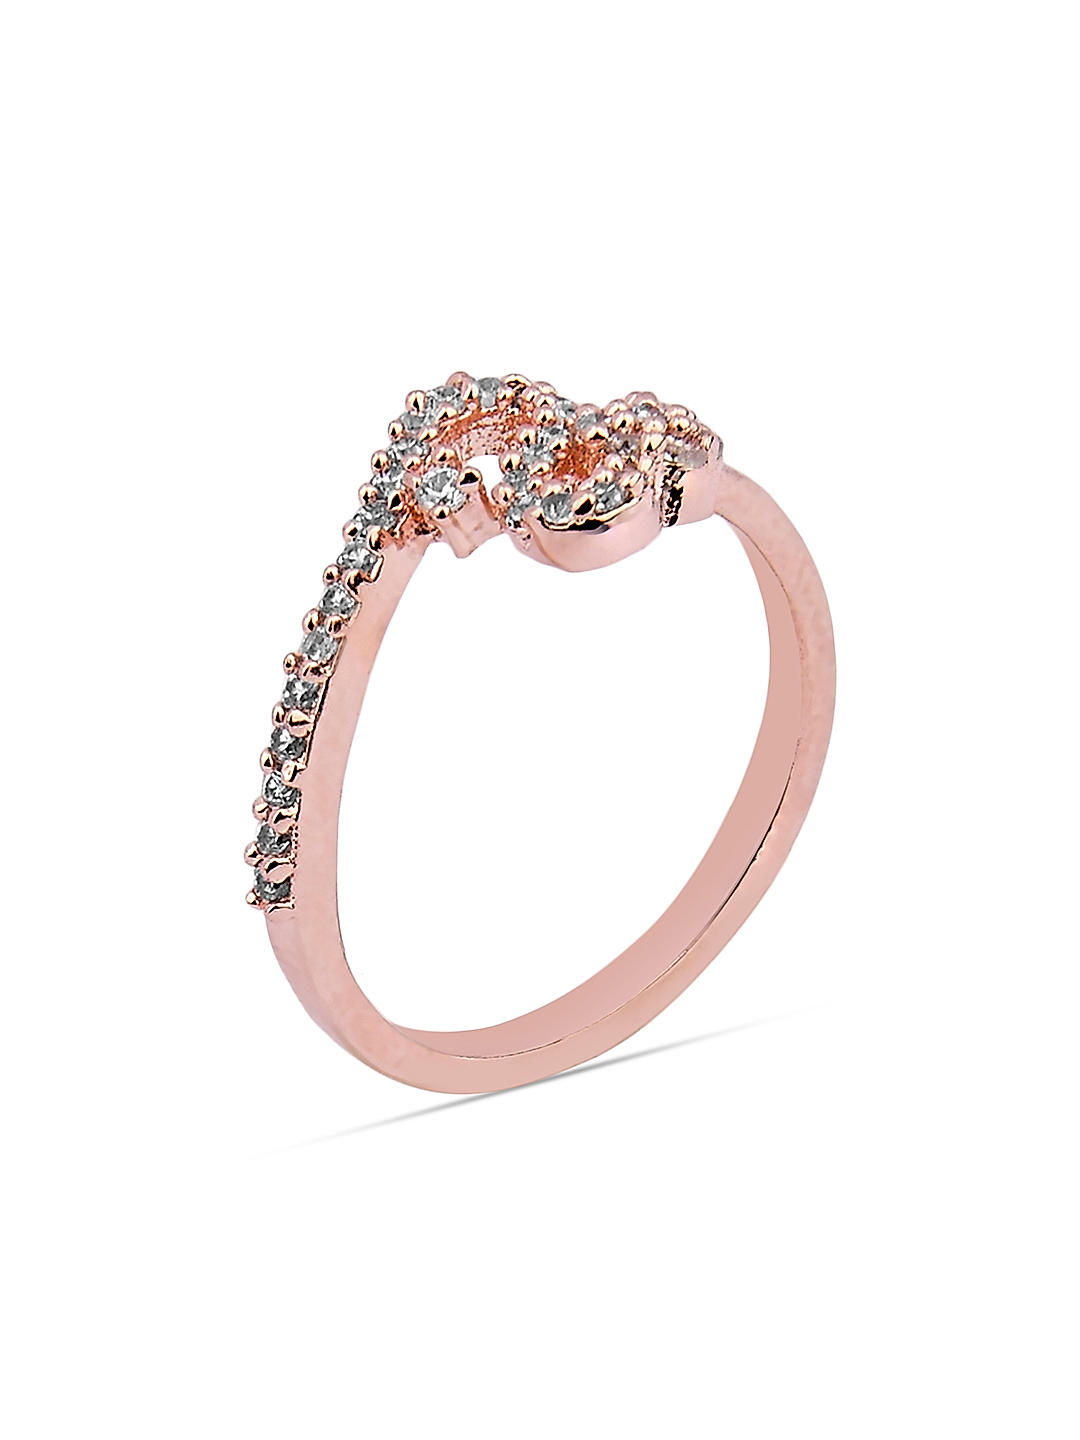 Pretty in Pink Platinum And Rose Gold Diamond RIng Online Jewellery  Shopping India | Platinum 950 | Candere by Kalyan Jewellers